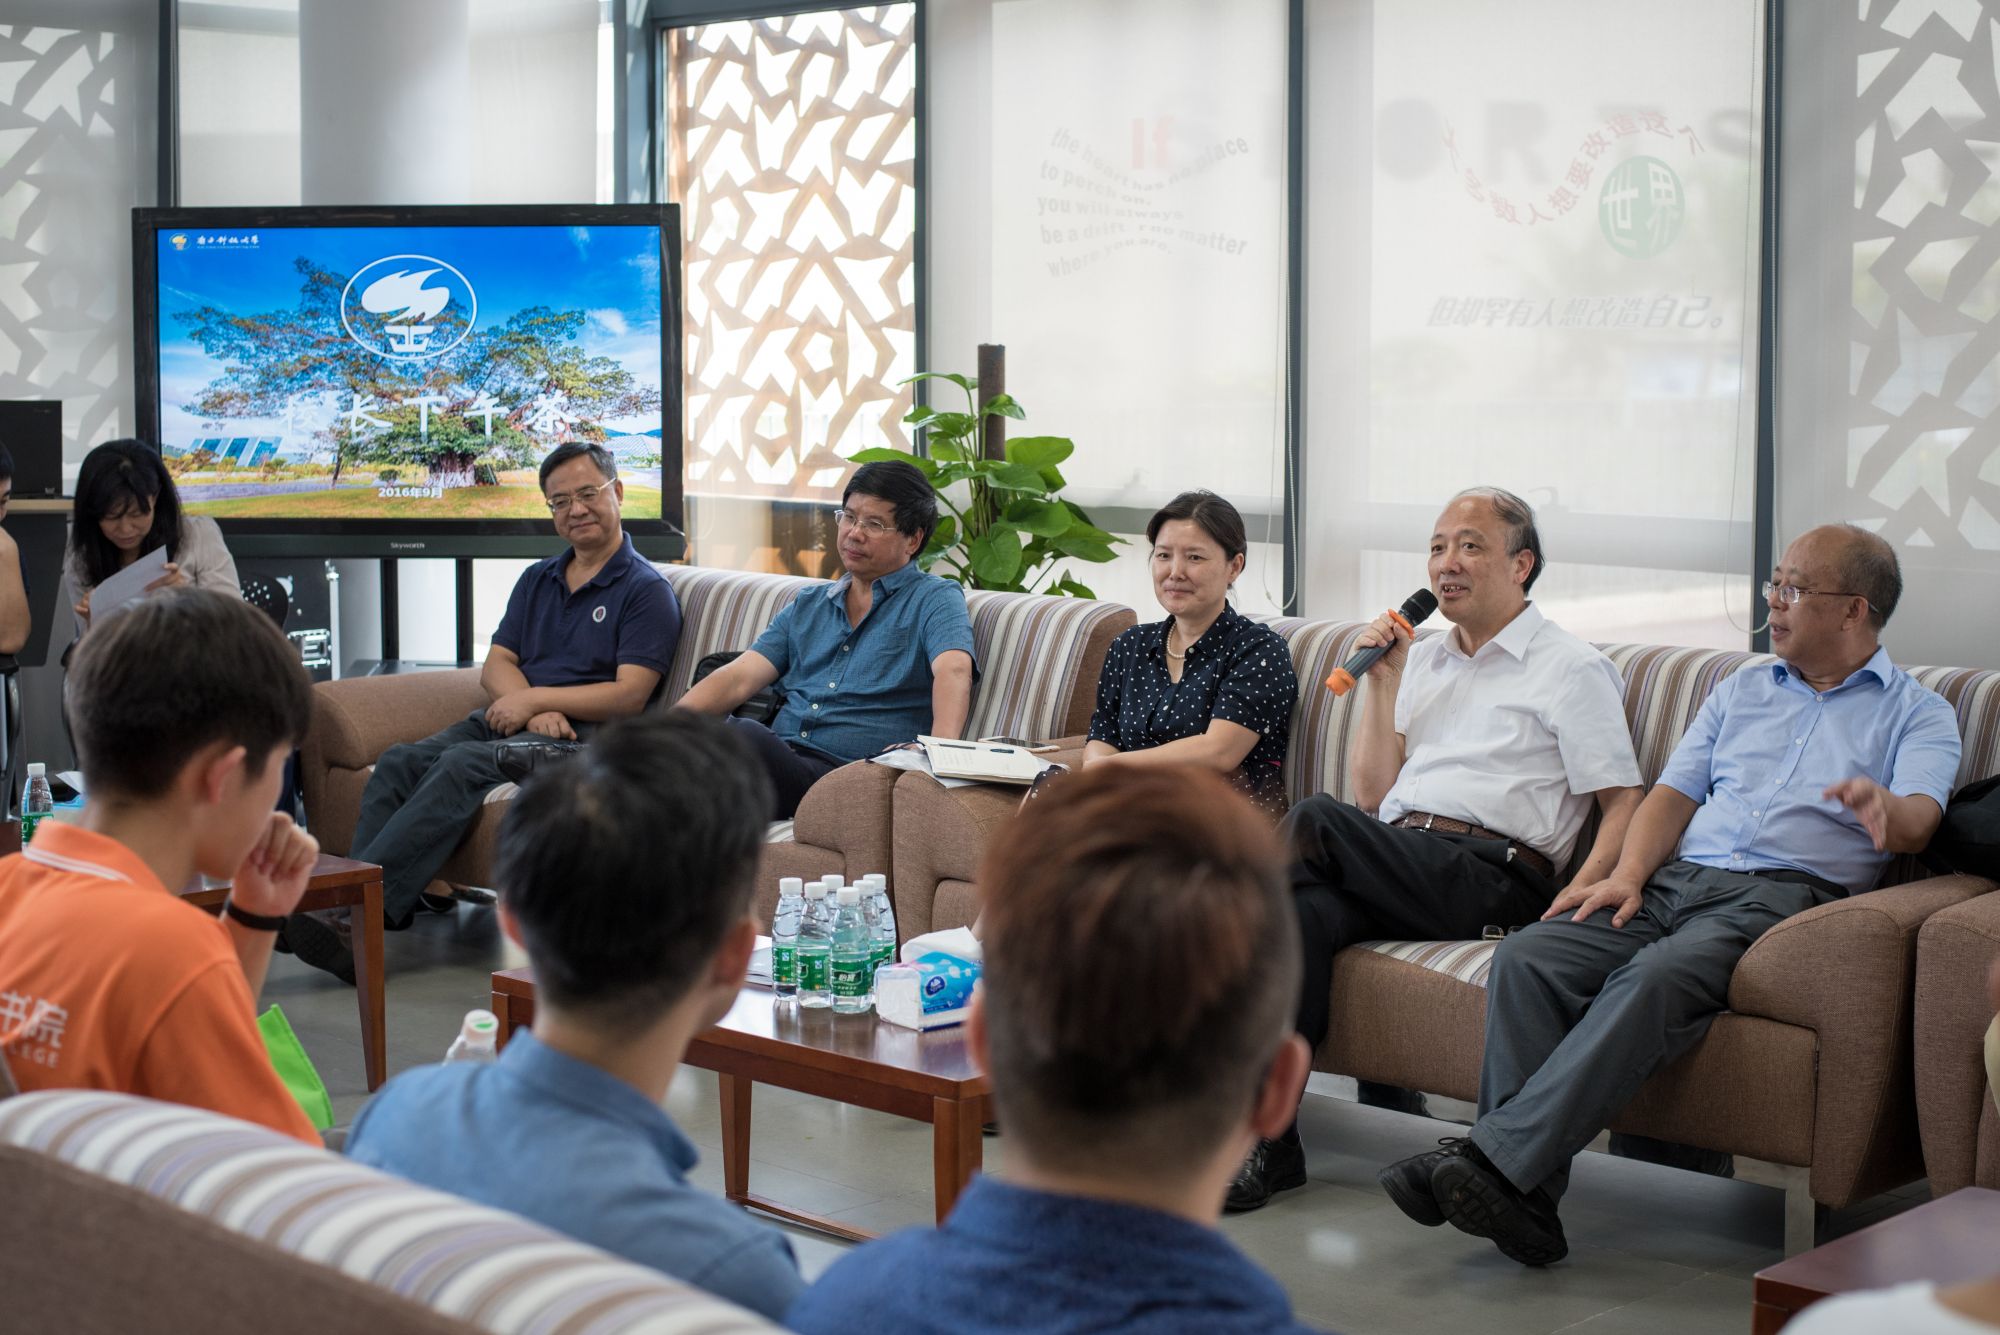 President Chen Shiyi Discusses Development Plans with Students on the Eve of Mid-Autumn Festival